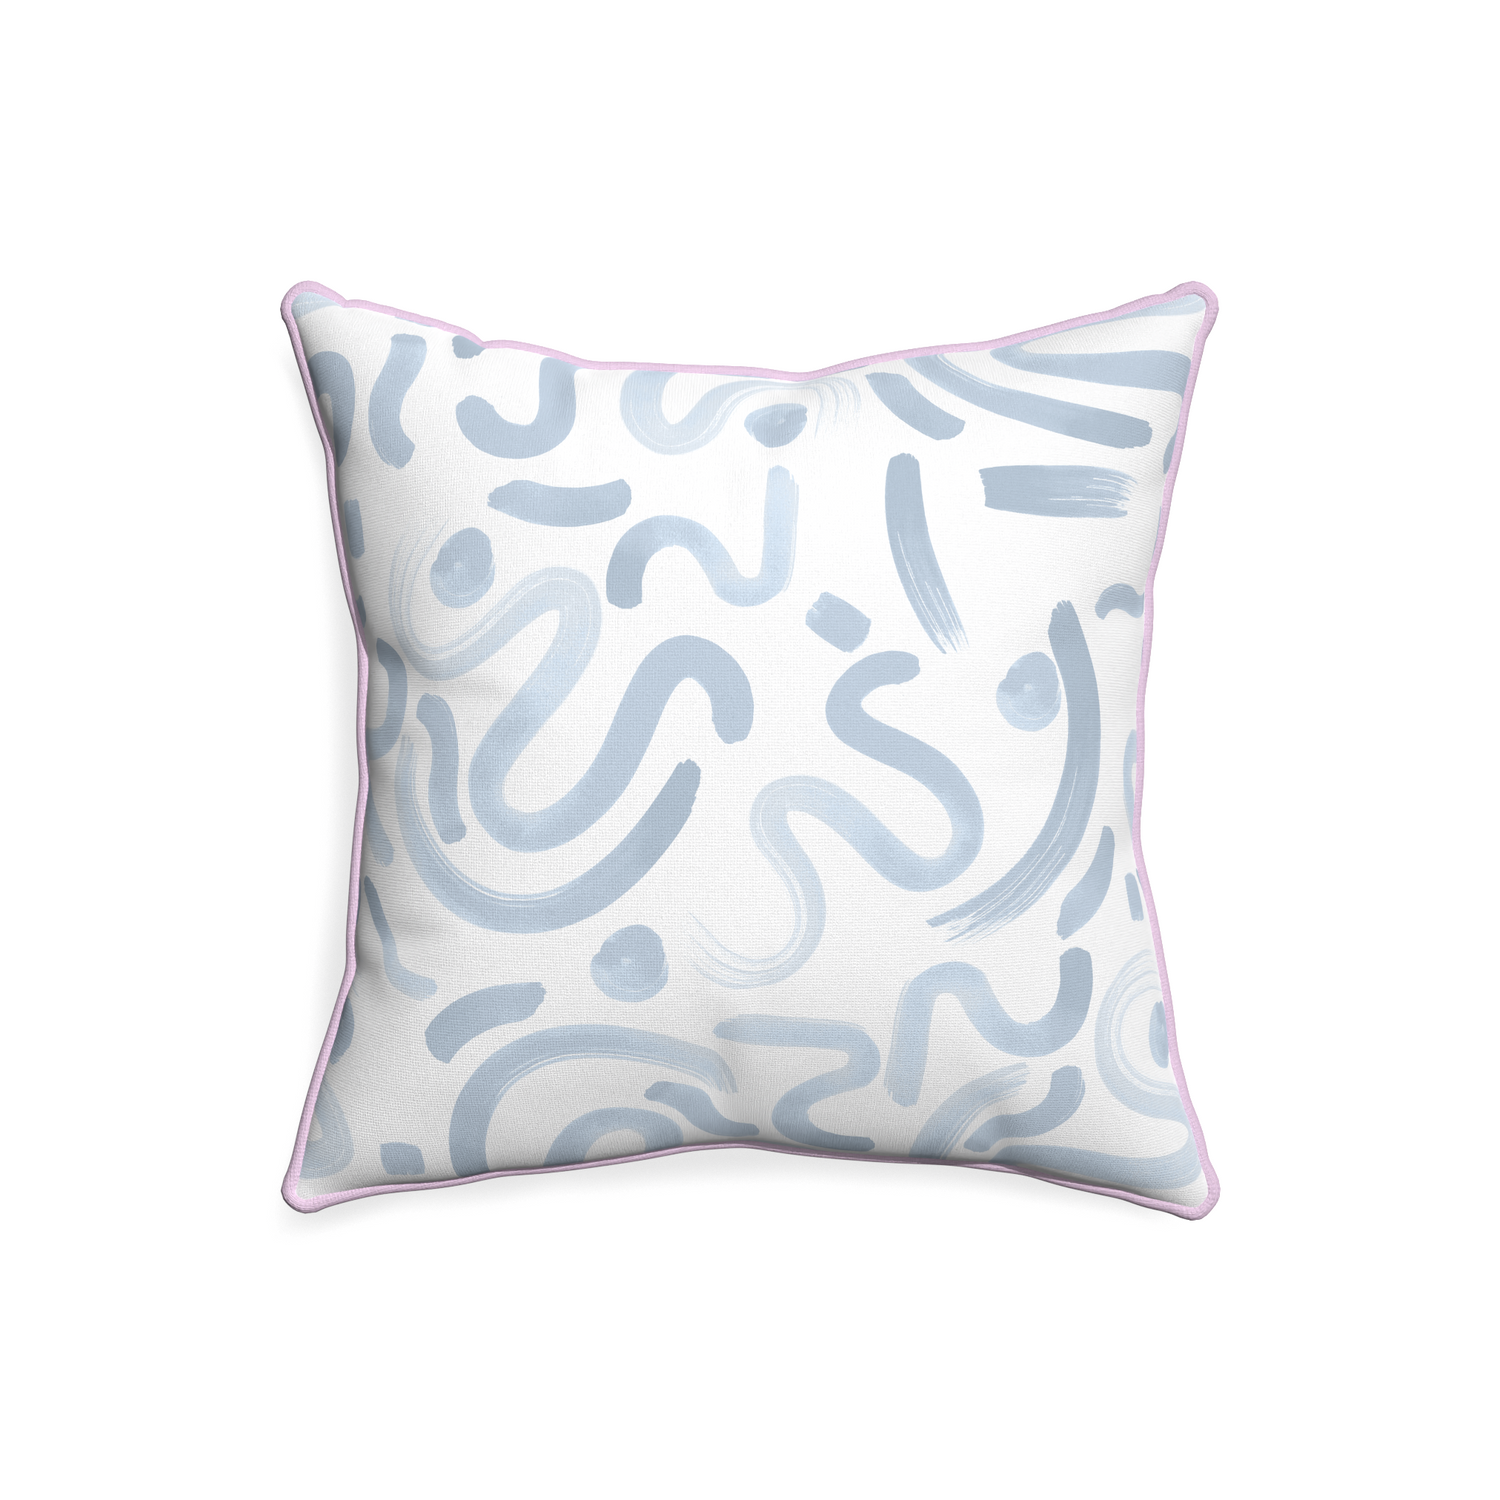 20-square hockney sky custom pillow with l piping on white background